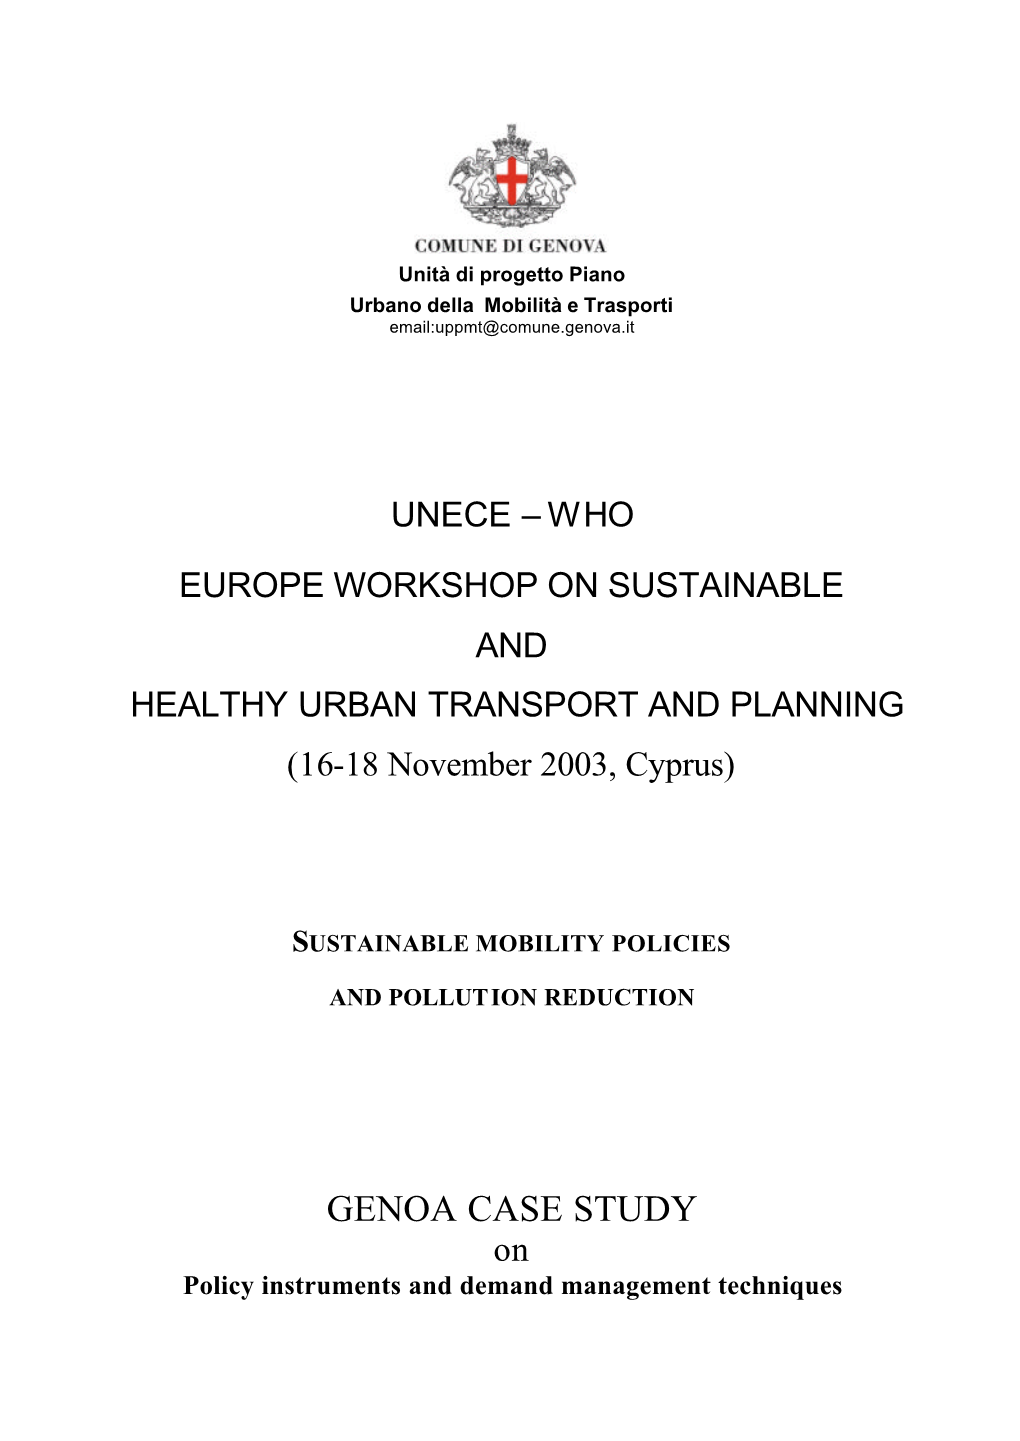 GENOA CASE STUDY on Policy Instruments and Demand Management Techniques